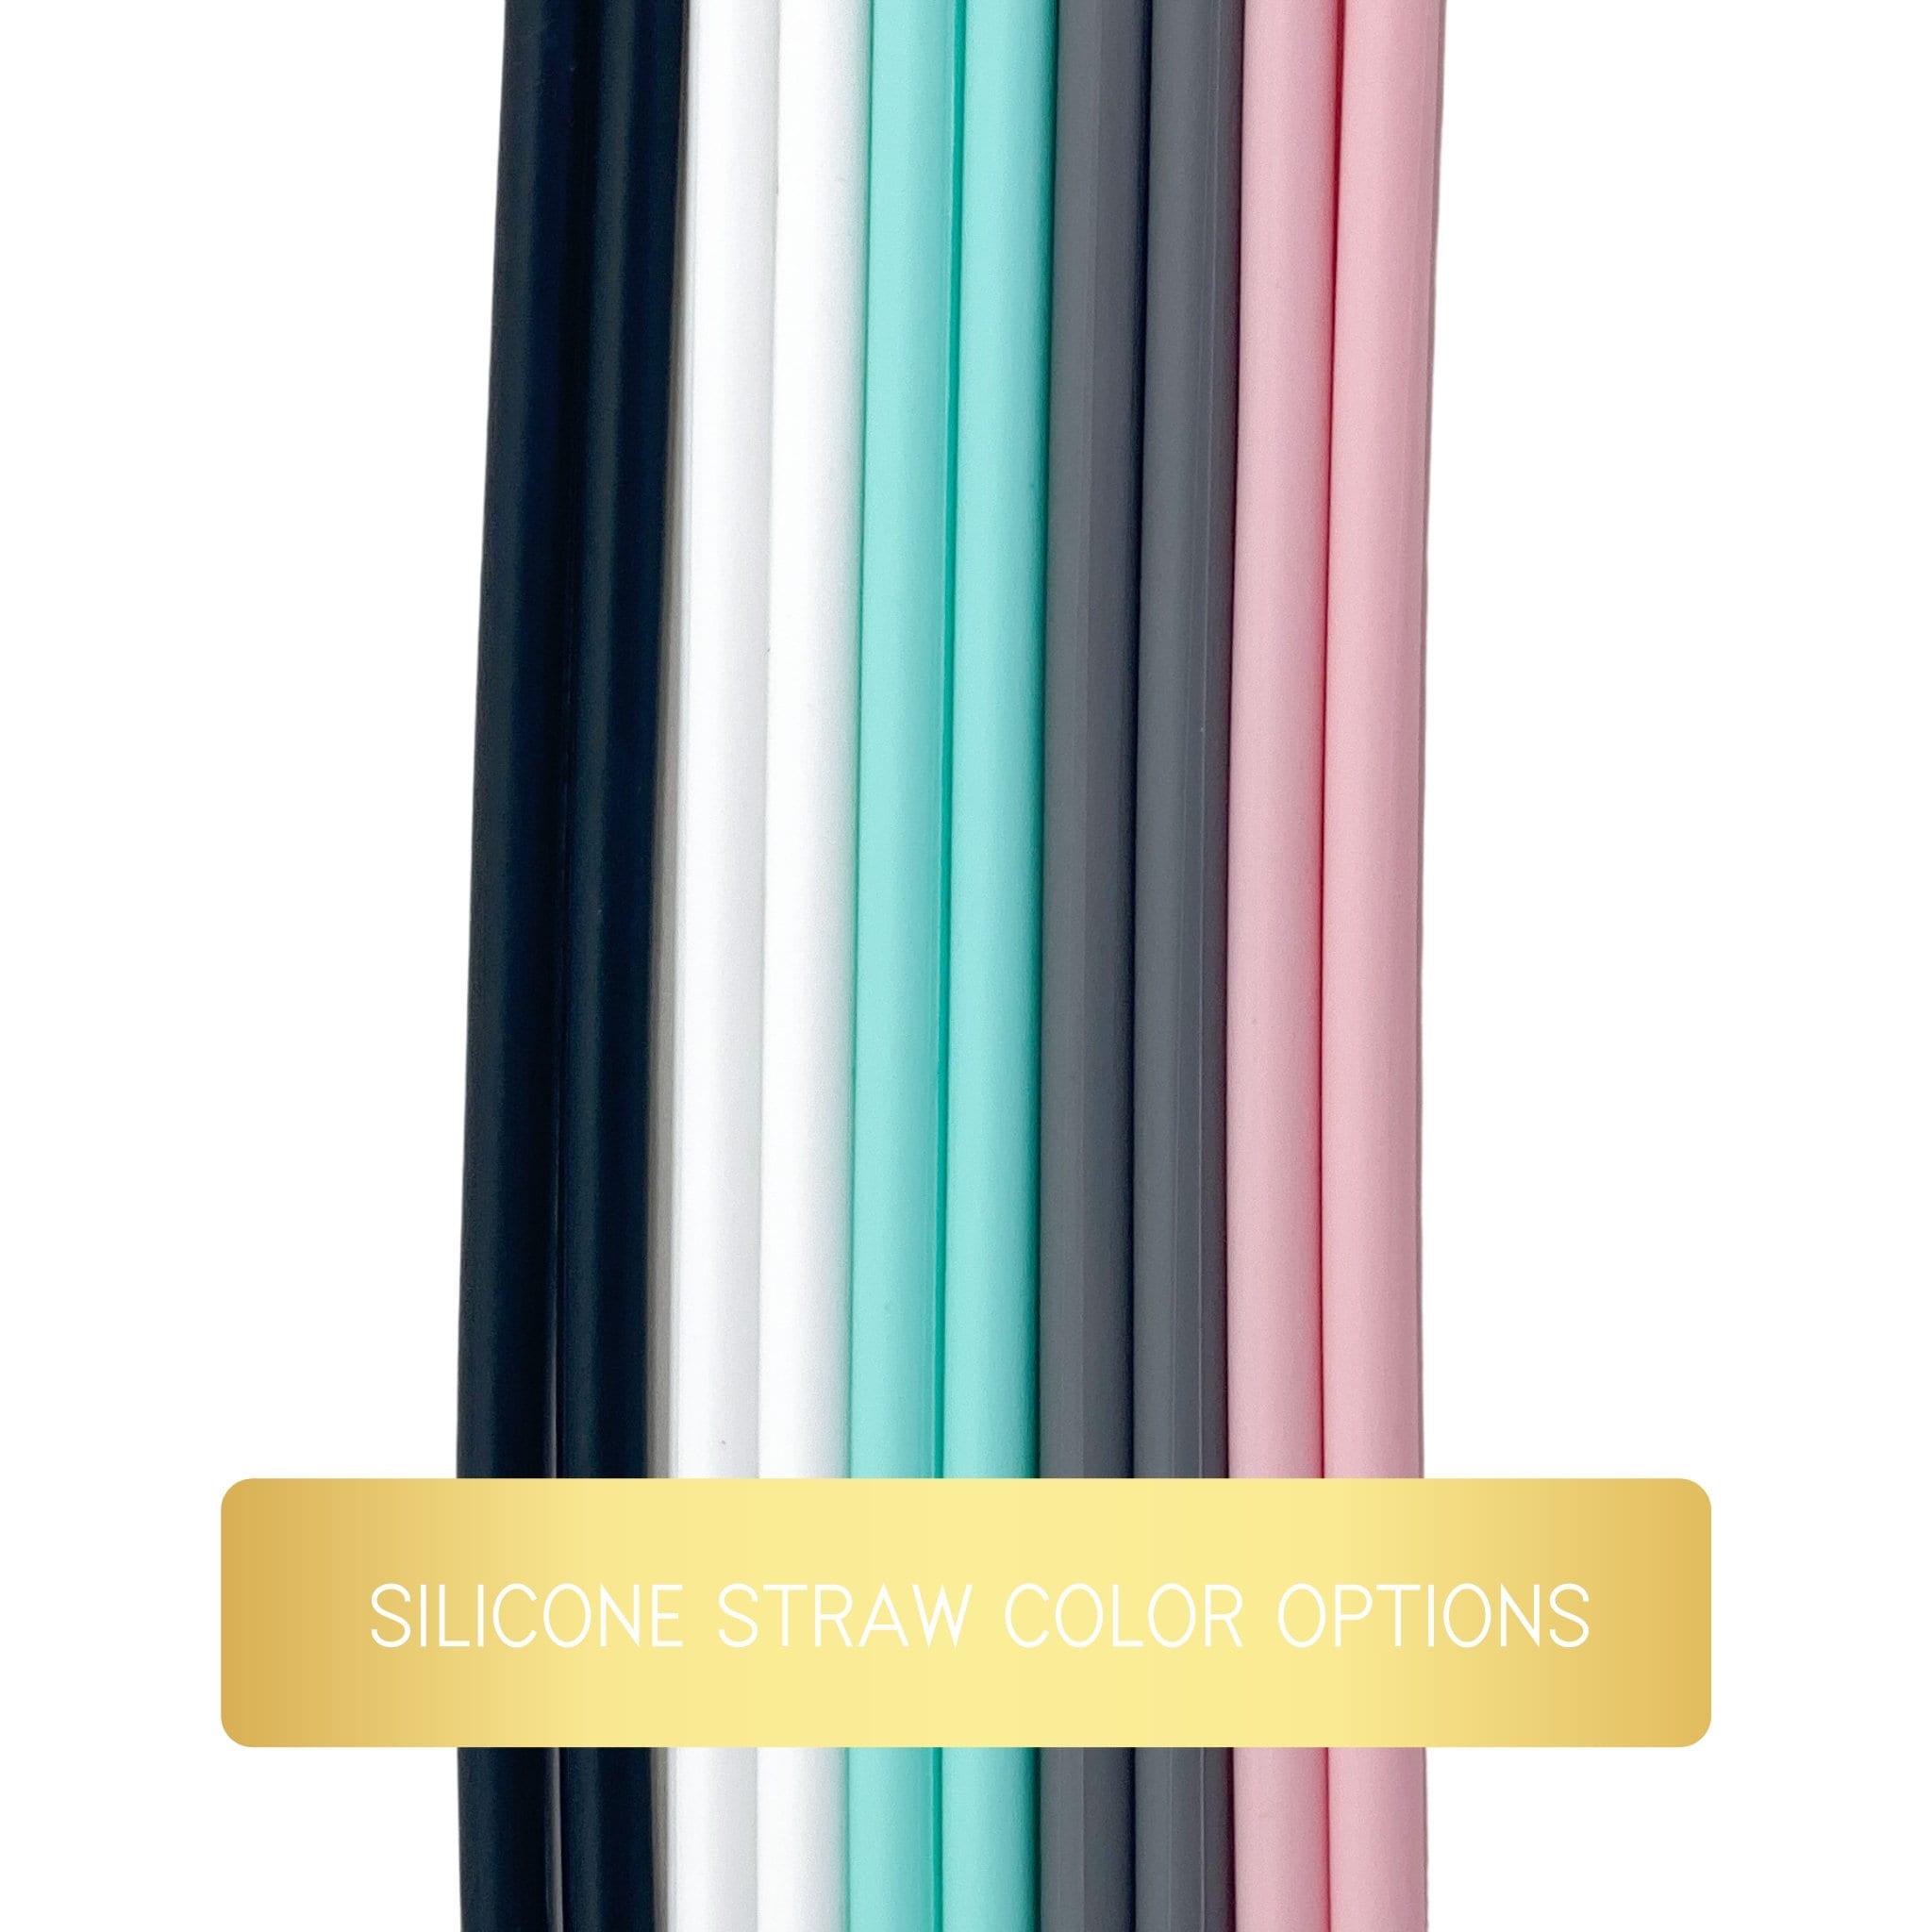 Reusable Straw Set | Metal or Glass | Includes Bag and Cleaning Brush)